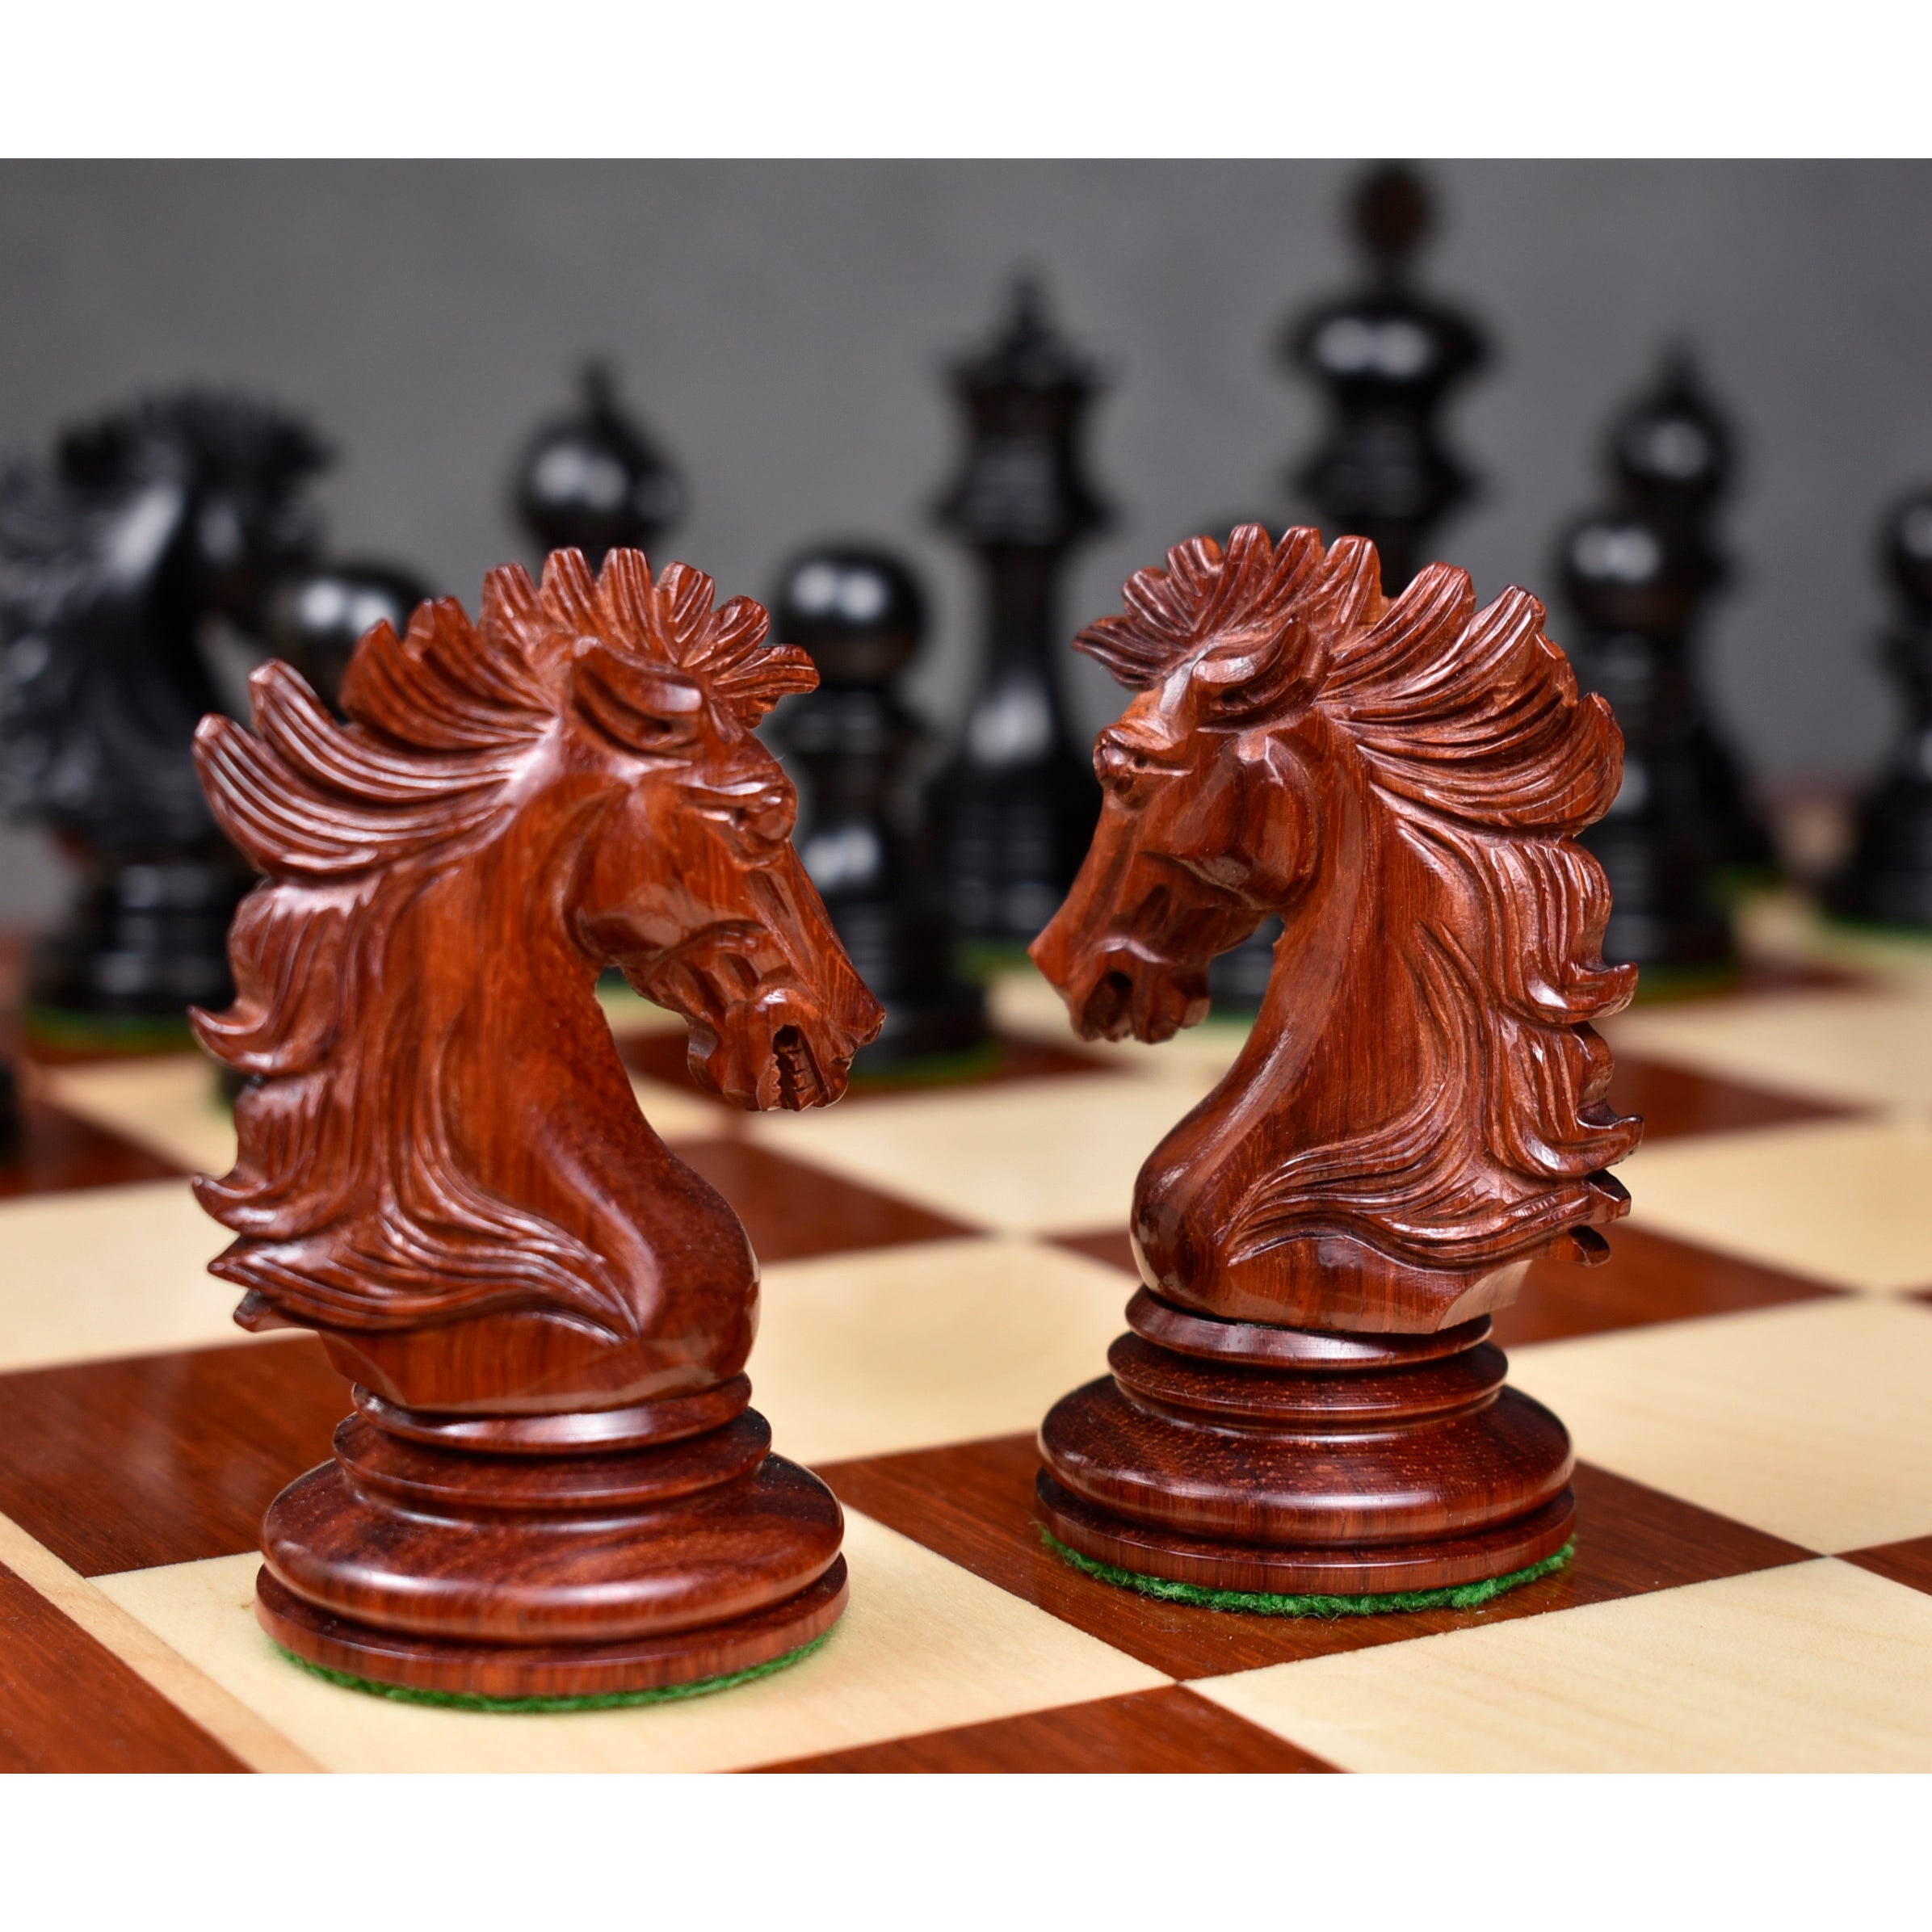 Deluxe Staunton Wood Chess Pieces with 2 extra Queens – Fancy Chess